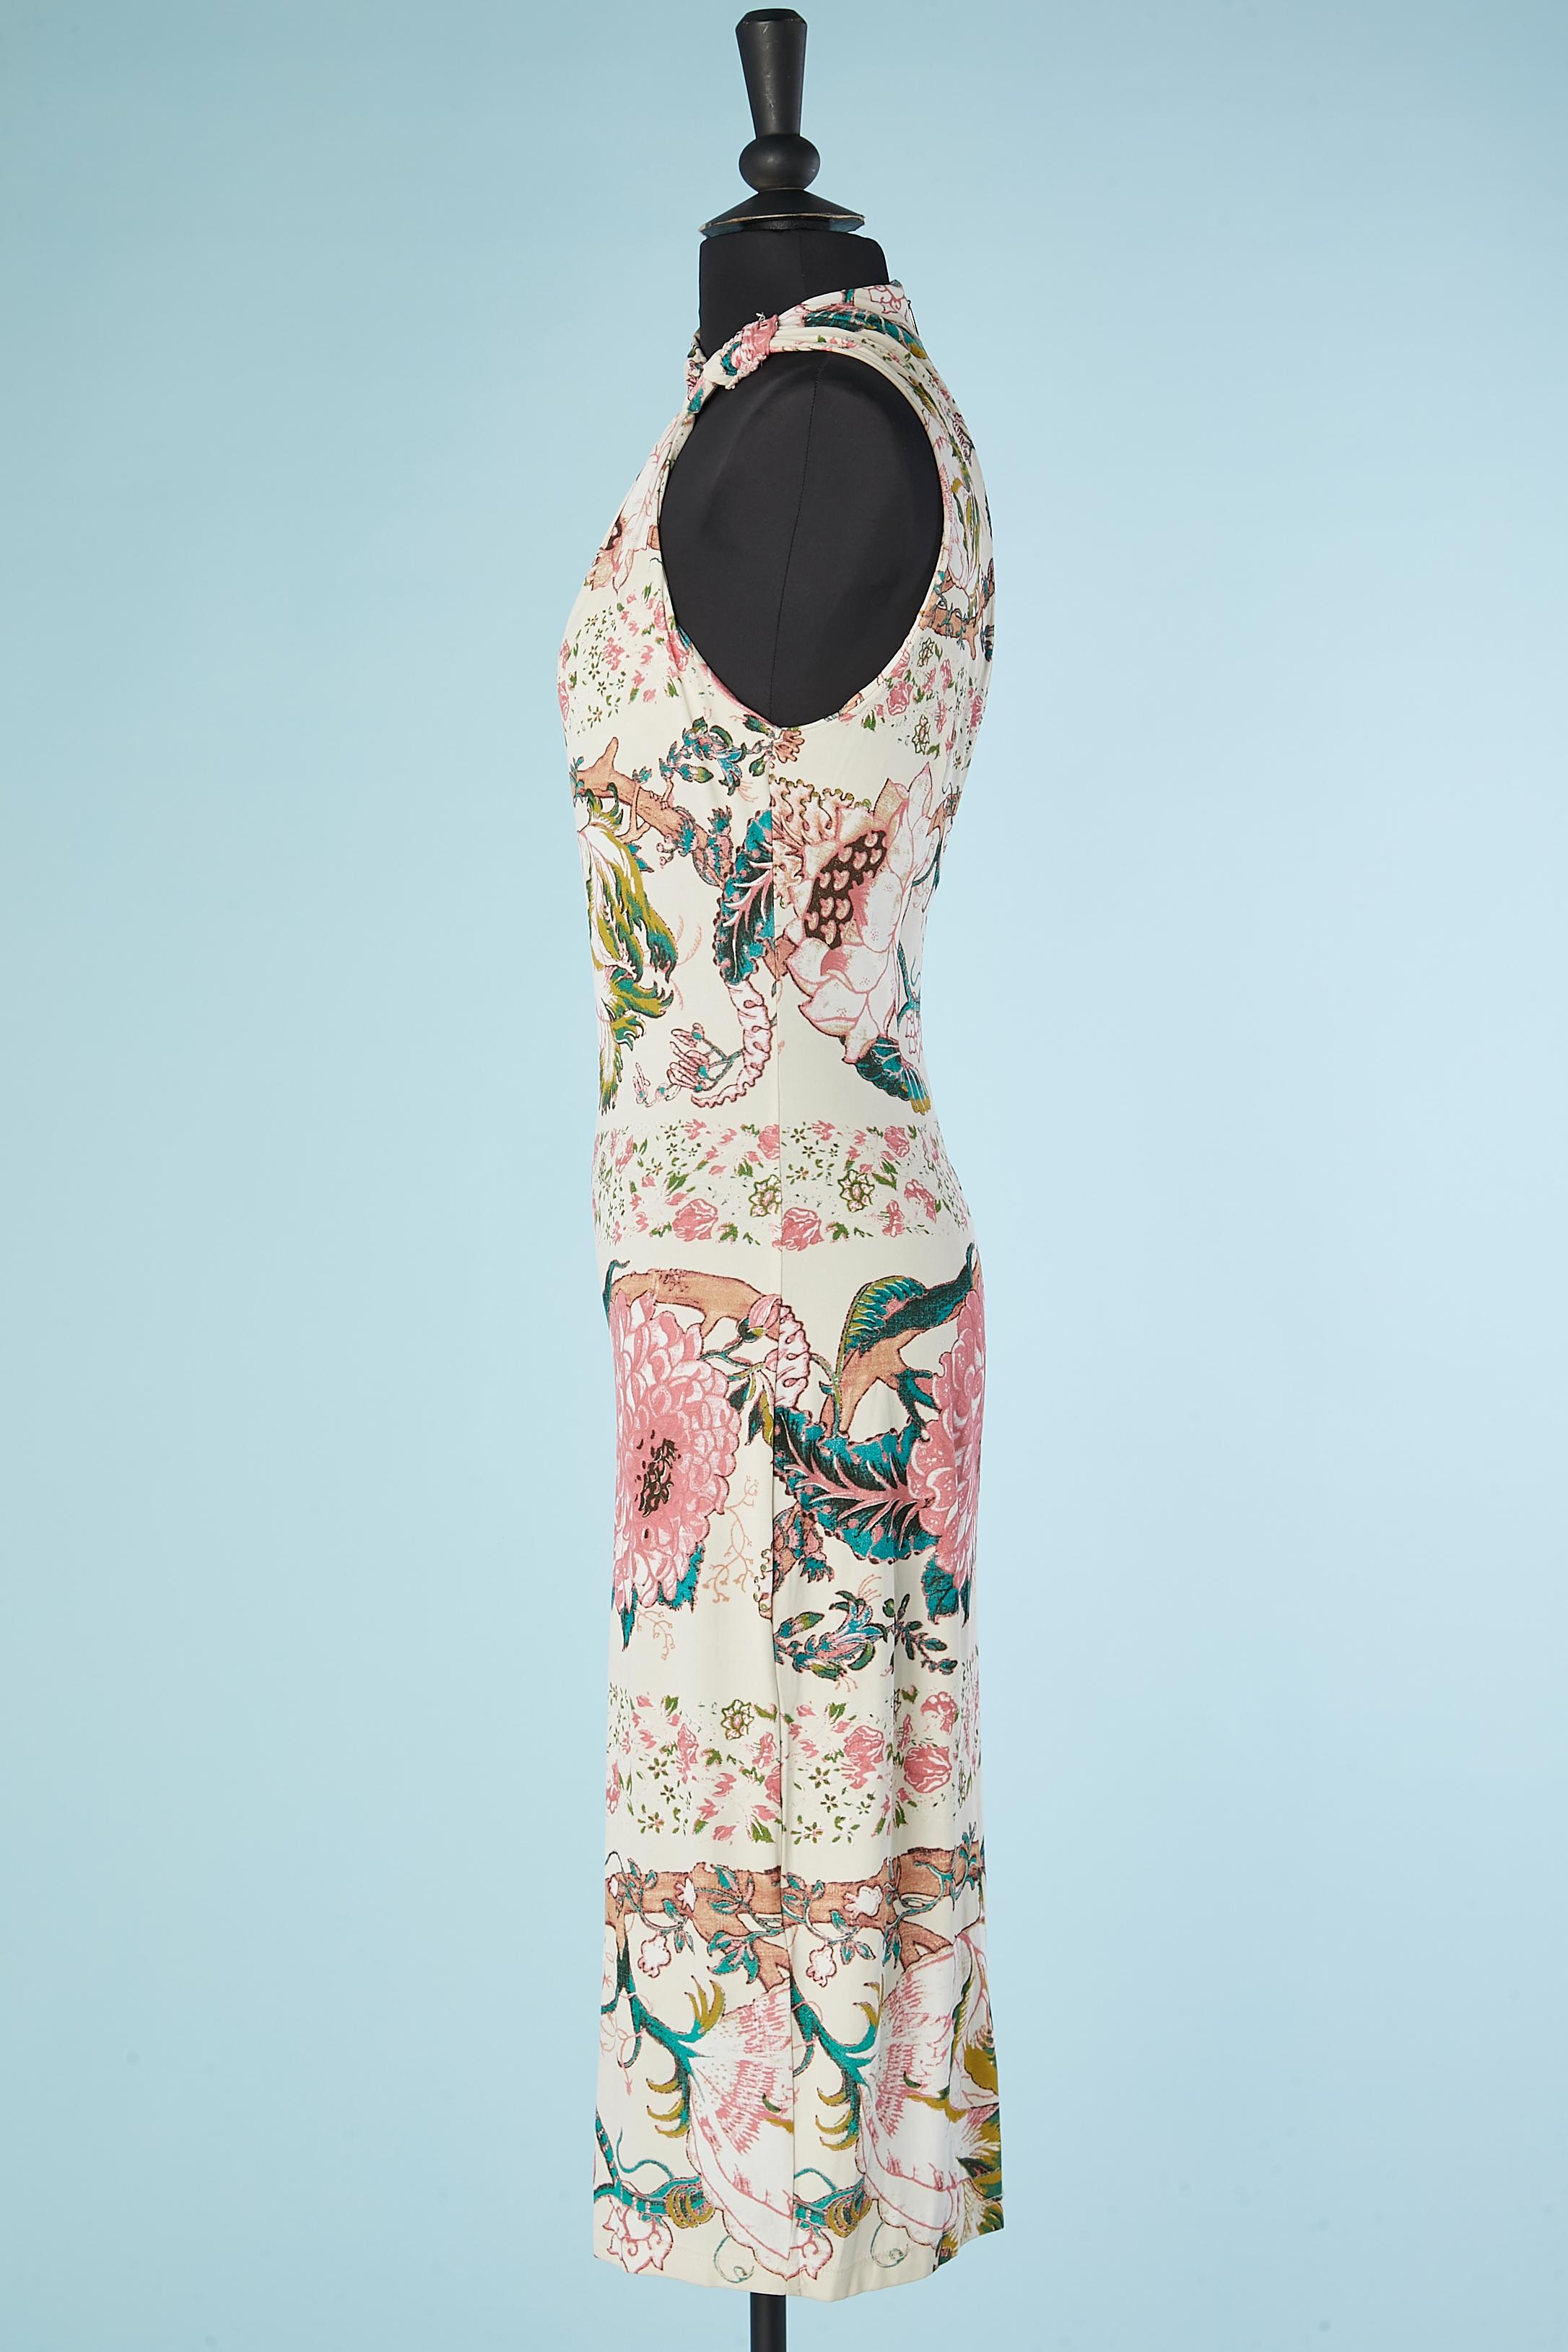 Sleeveless and drape printed jersey dress Roberto Cavalli  In Excellent Condition For Sale In Saint-Ouen-Sur-Seine, FR